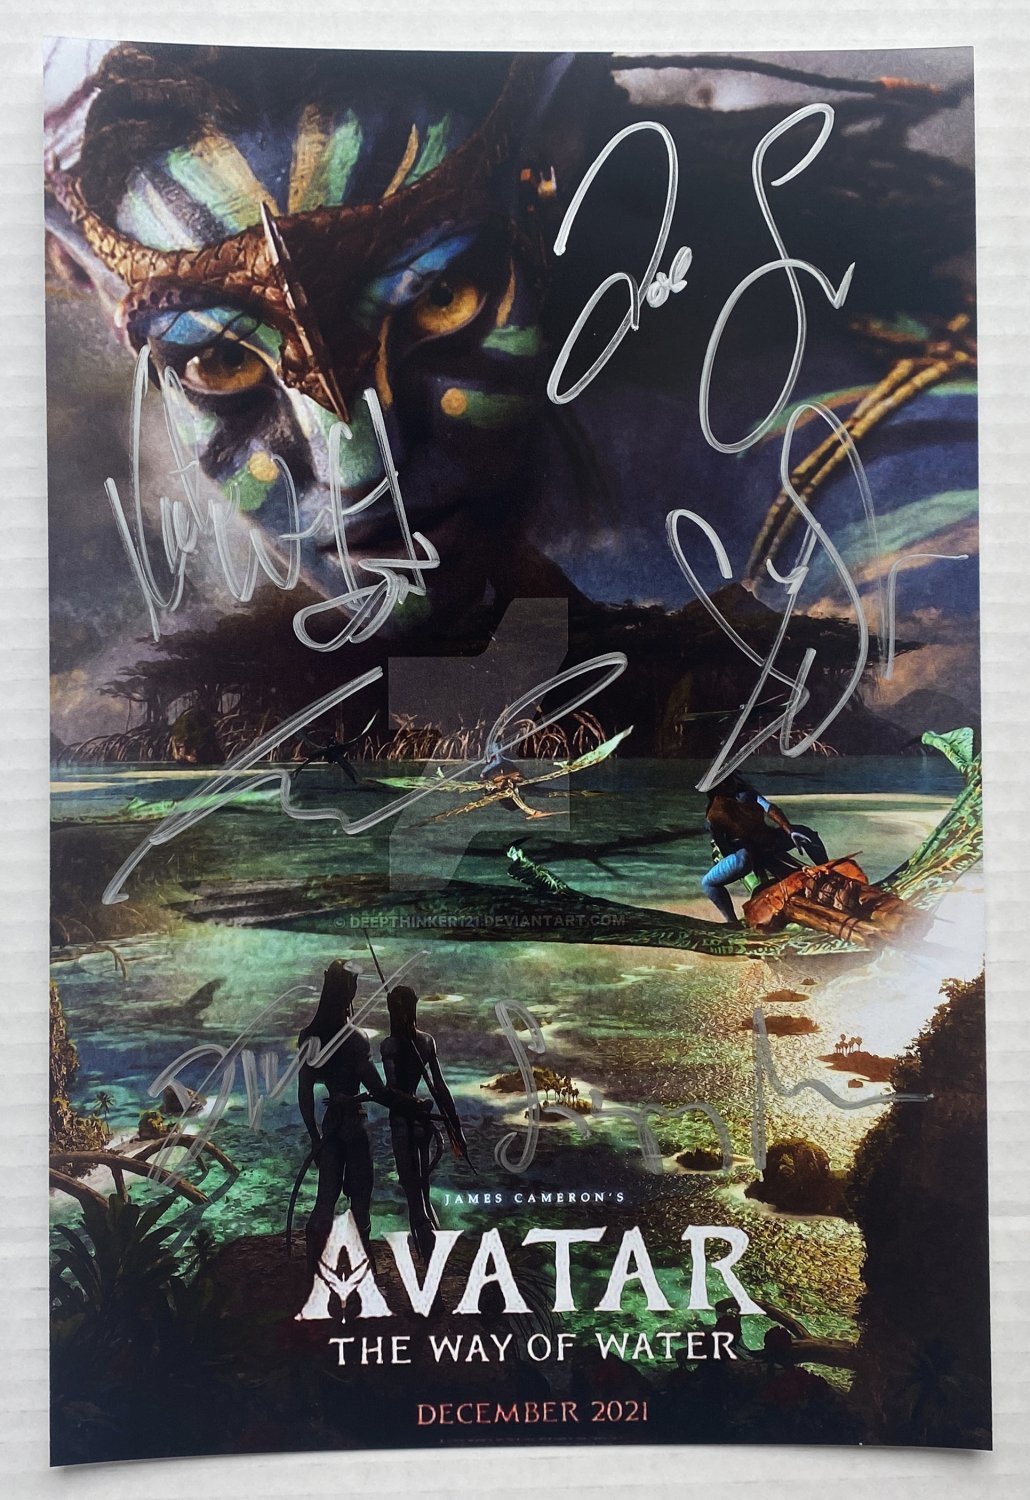 Avatar 2 The Way of Water cast signed autographed 8x12 photo photograph